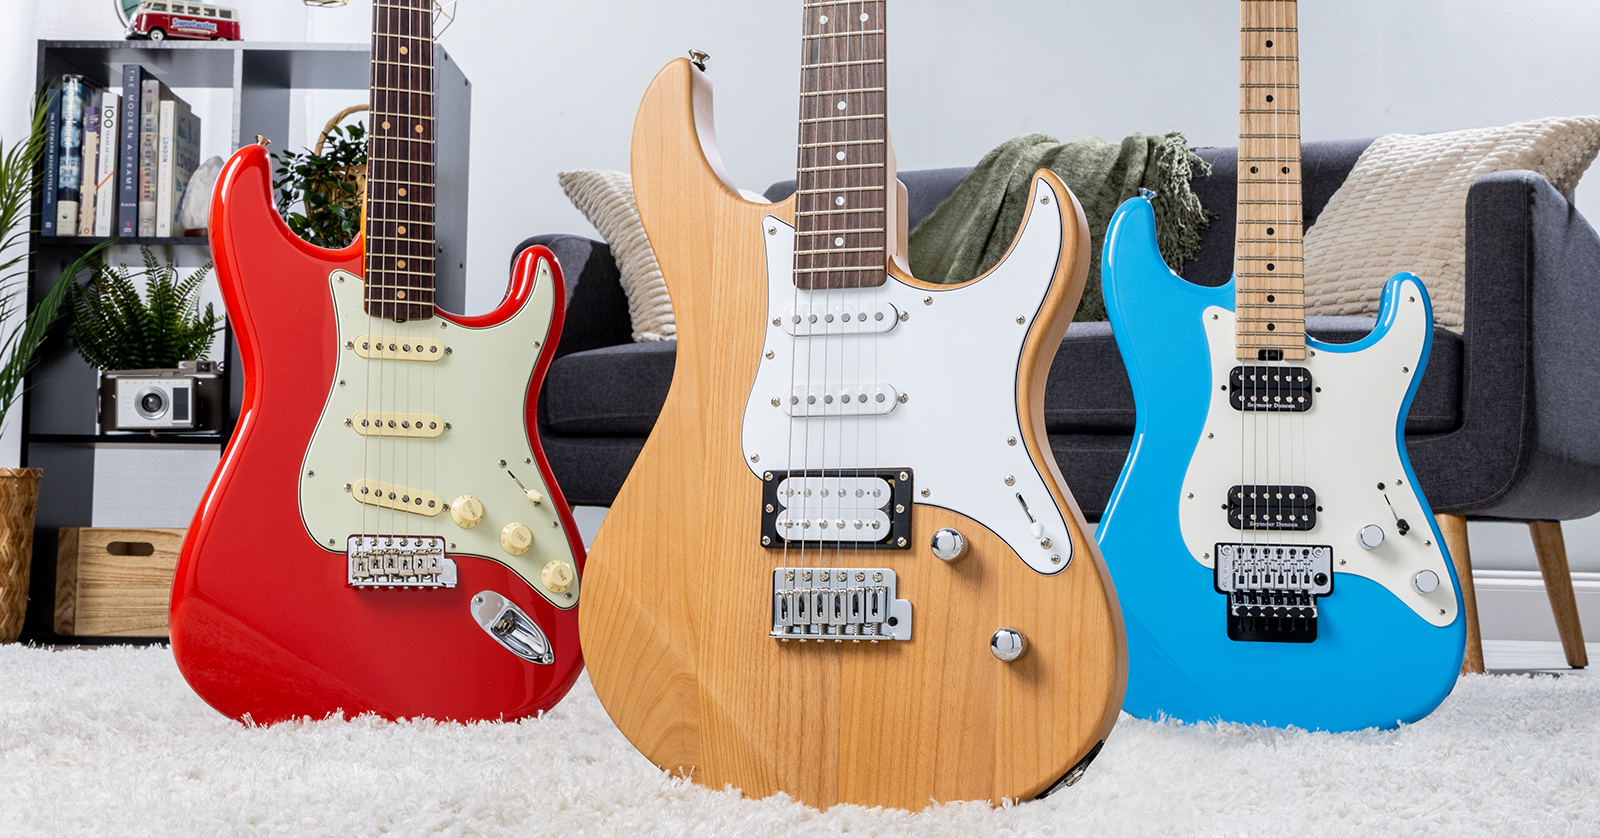 These 5 Have Been The Best Electric Guitars for My Small Hands